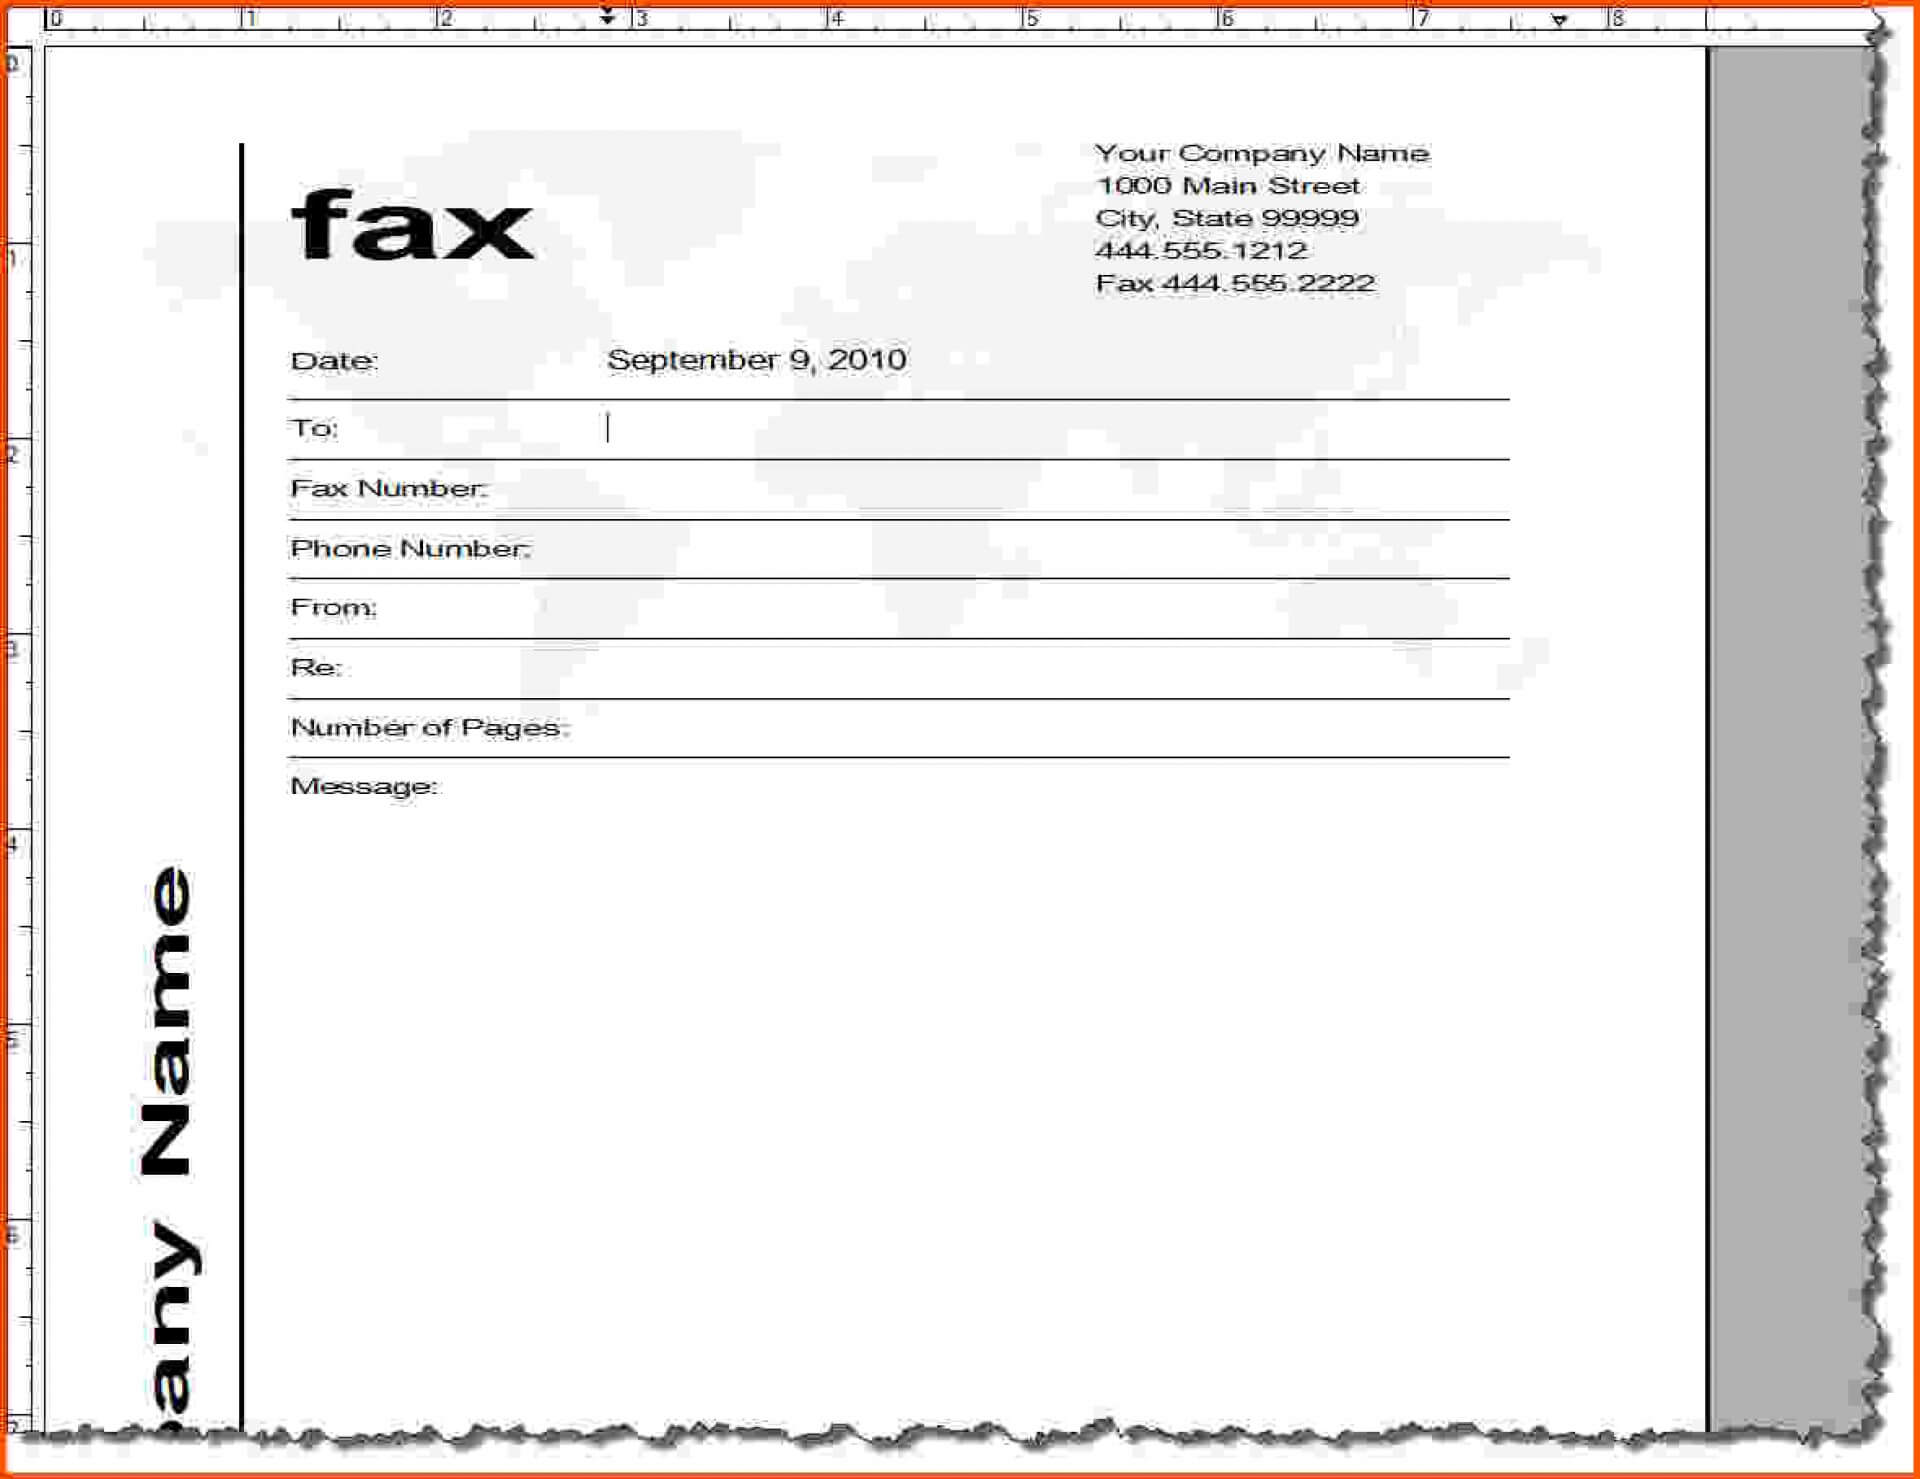 009 Template Ideas Fax Cover Sheet Word Free Printable Throughout Fax Template Word 2010